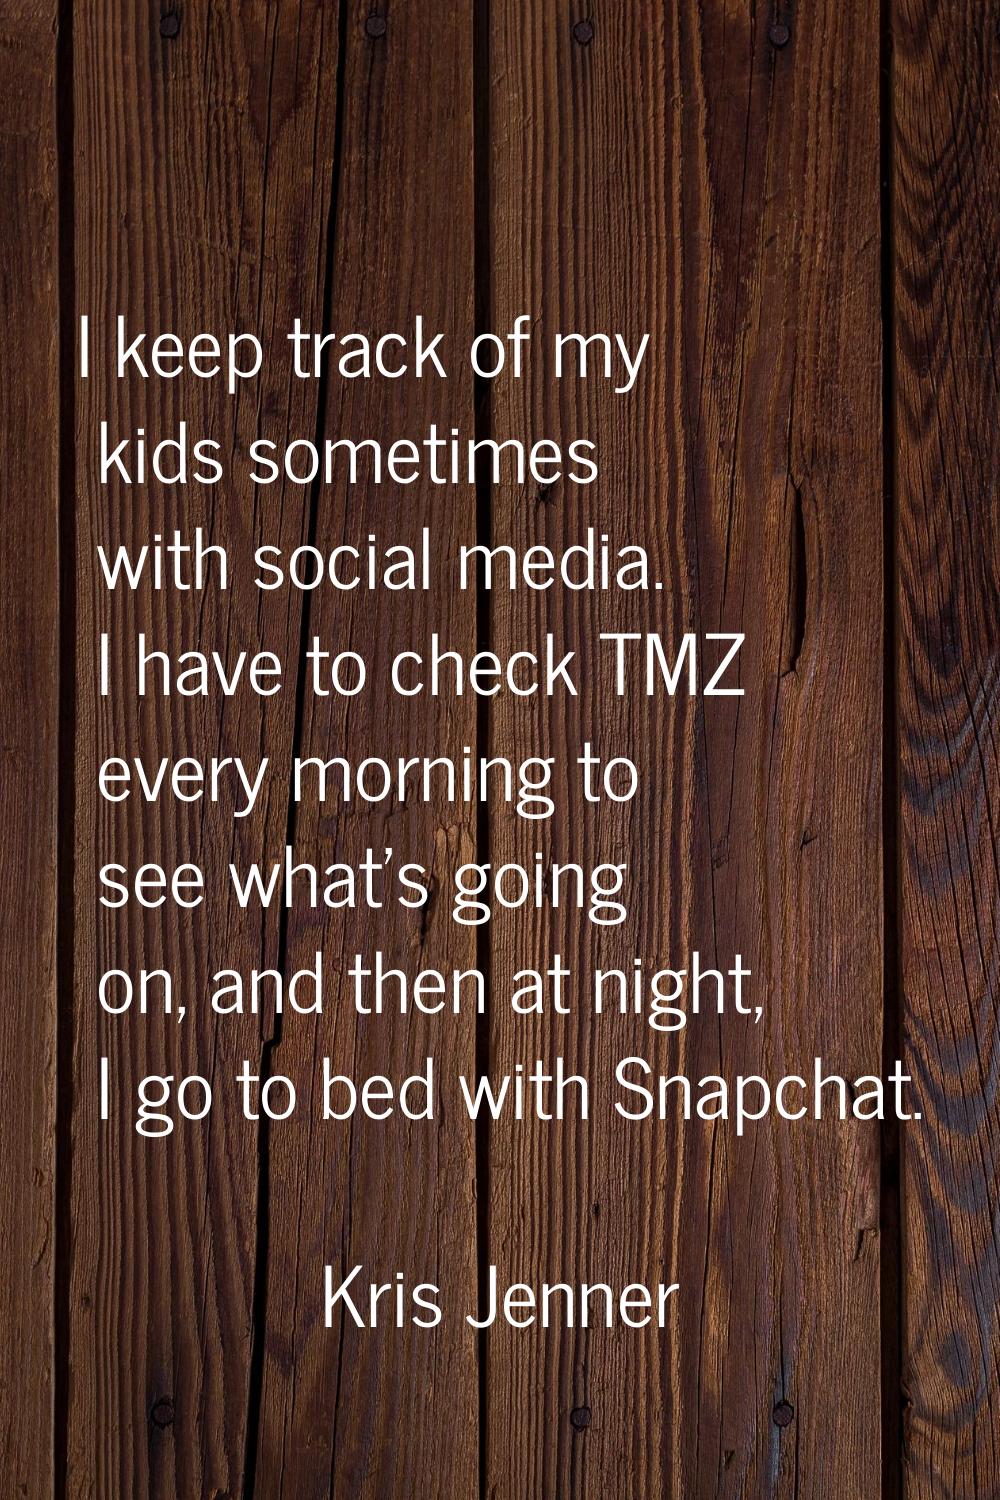 I keep track of my kids sometimes with social media. I have to check TMZ every morning to see what'